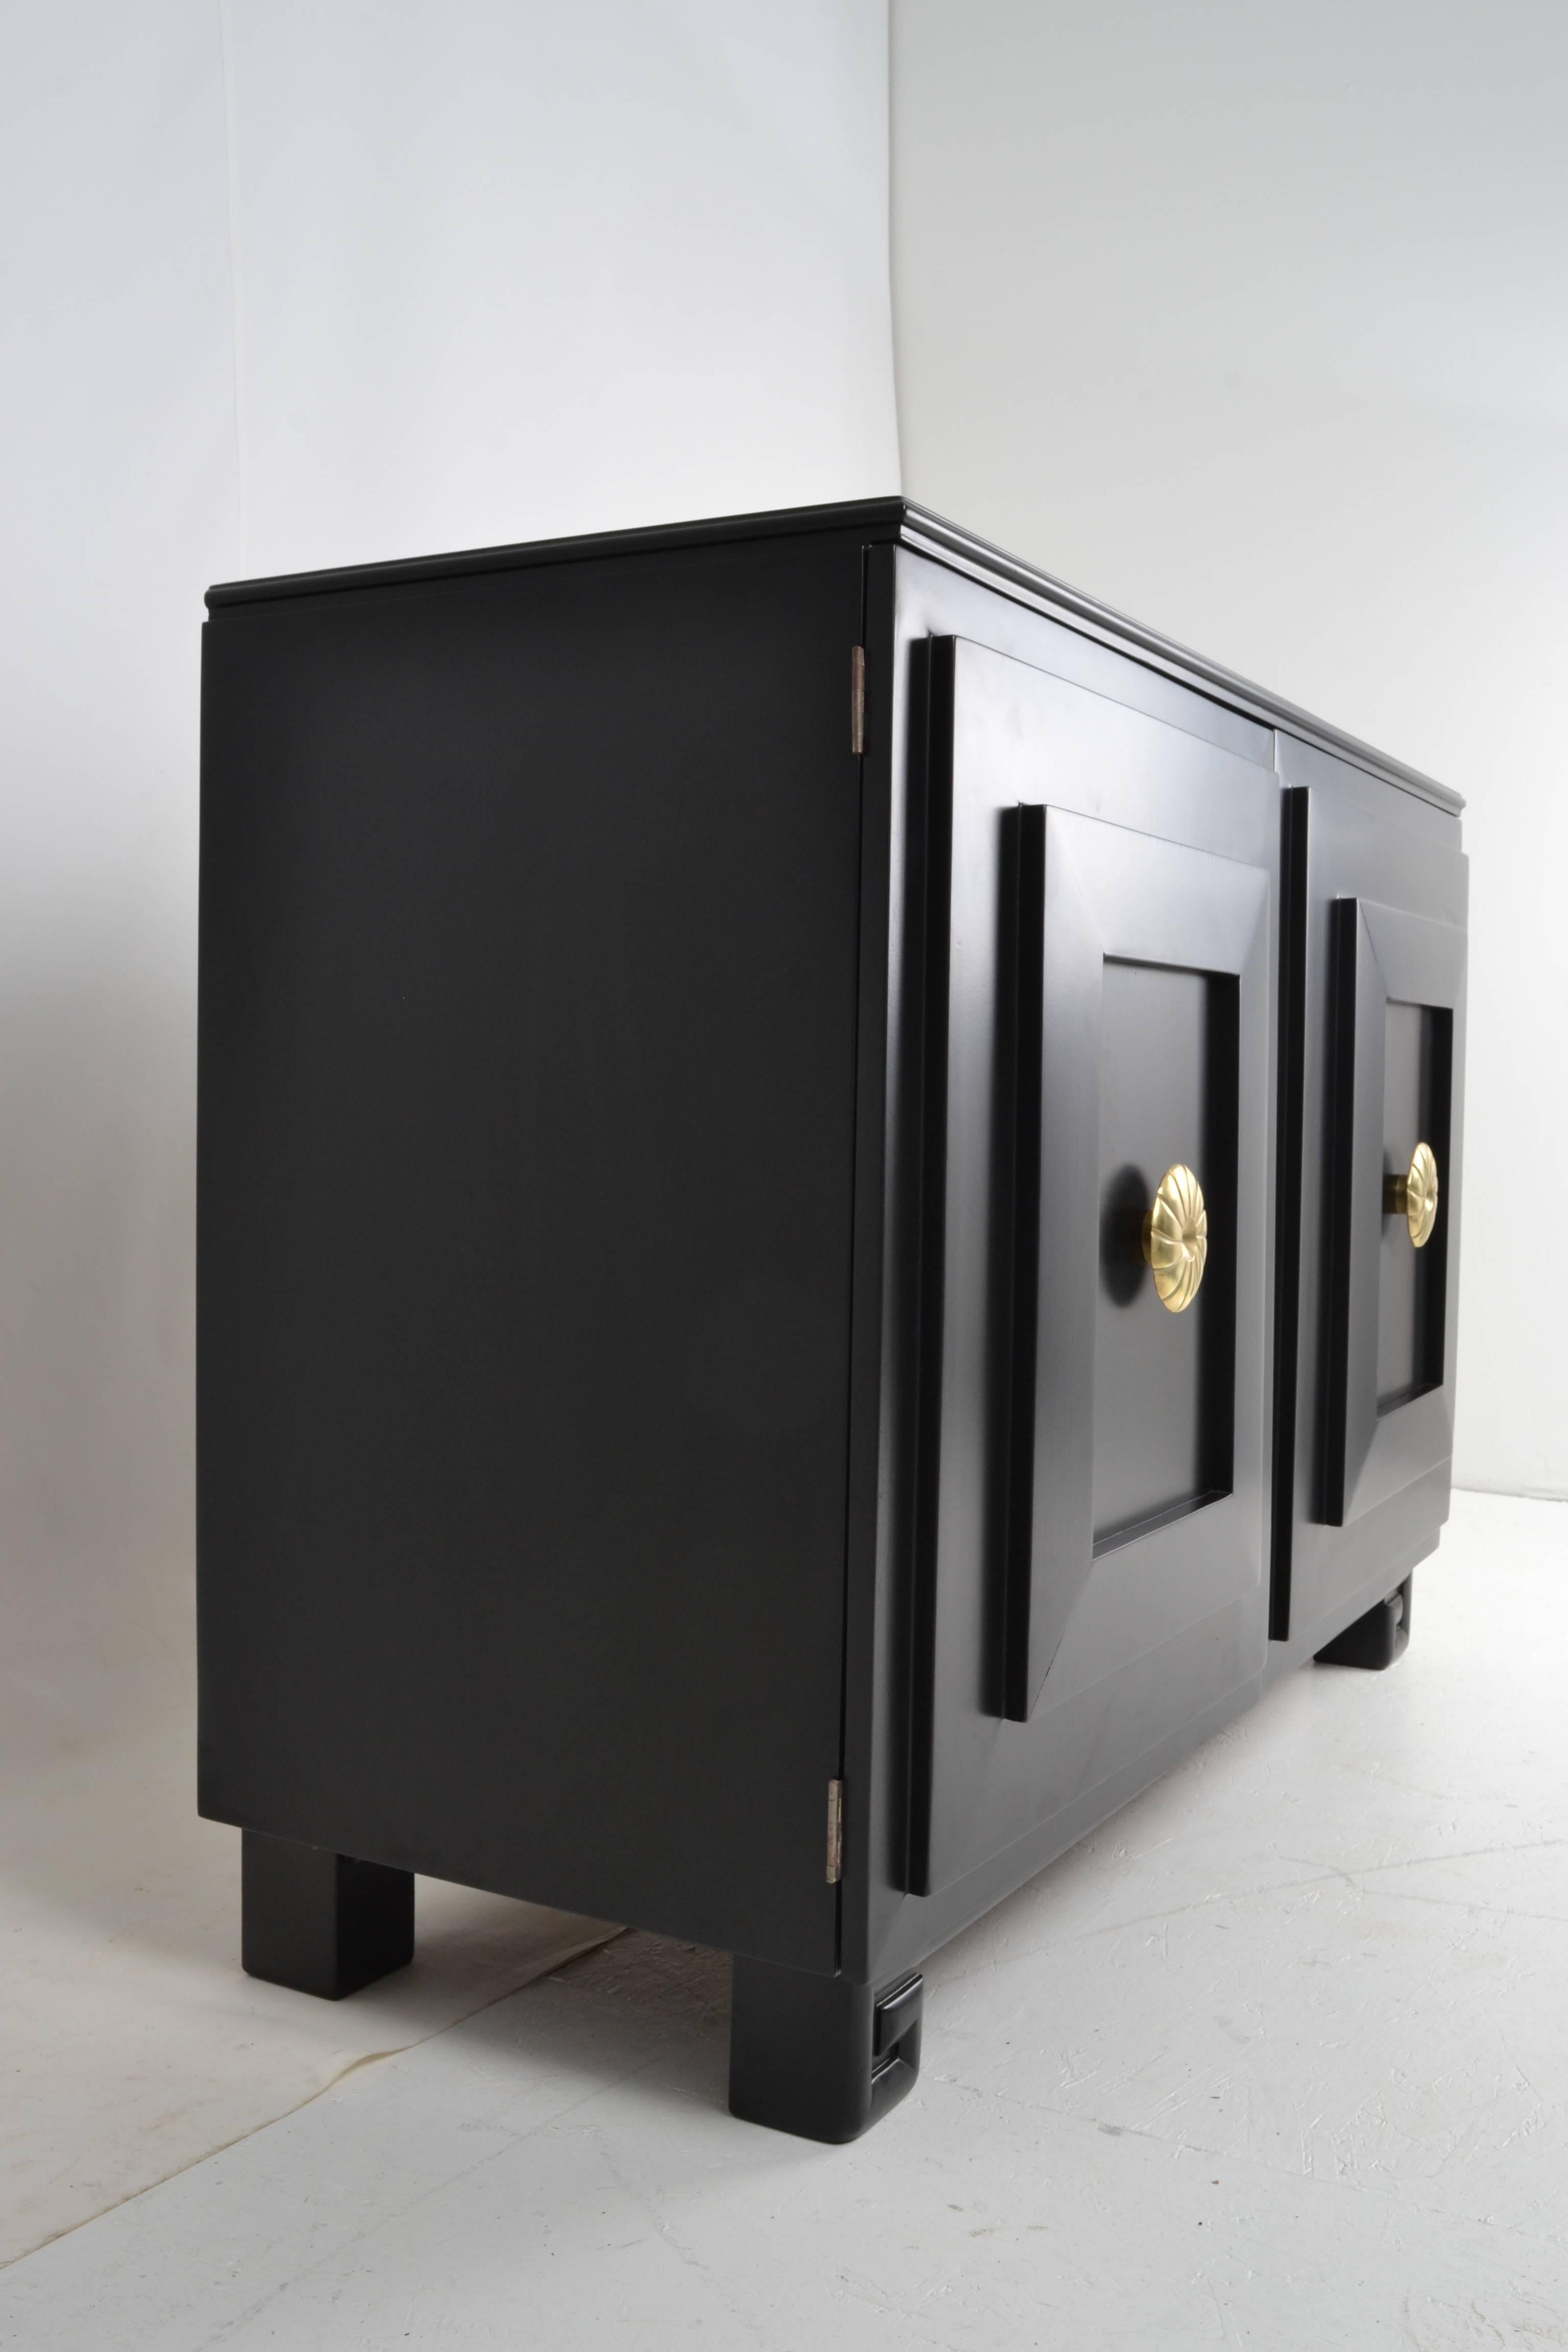 A handsome cabinet fully restored in satin black lacquer. Large decorative brass pulls. Nice Greek key detail on feet. Right side has fitted drawers, left has adjustable shelf. Quality construction. 